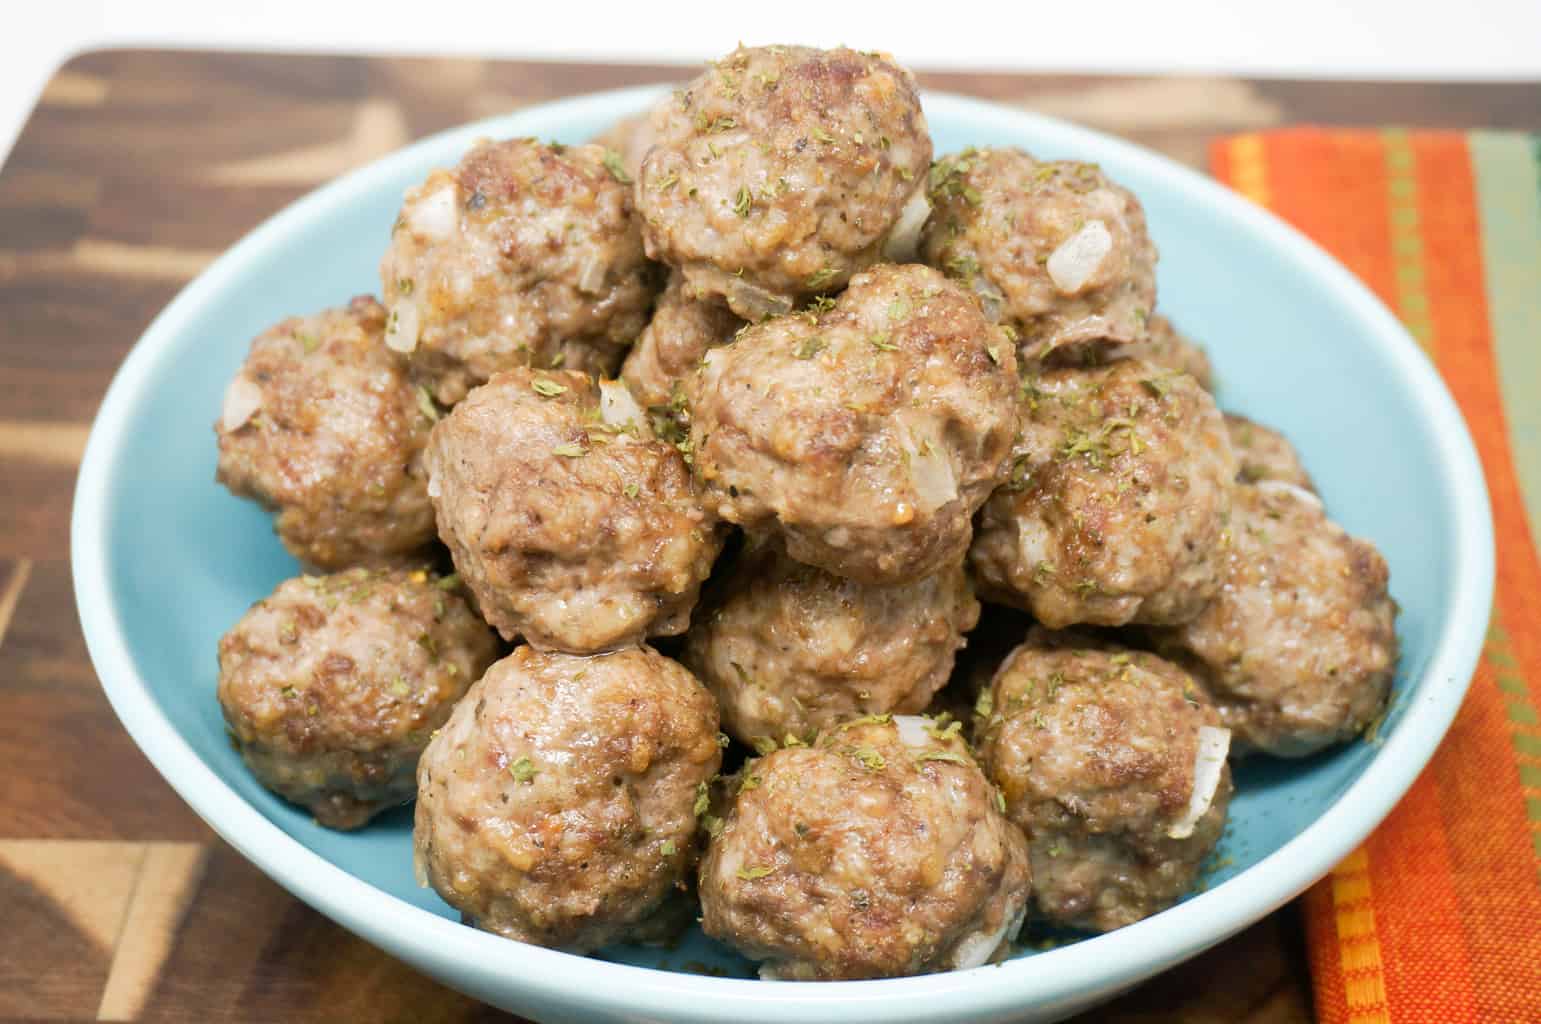 Meatballs that are easy to make